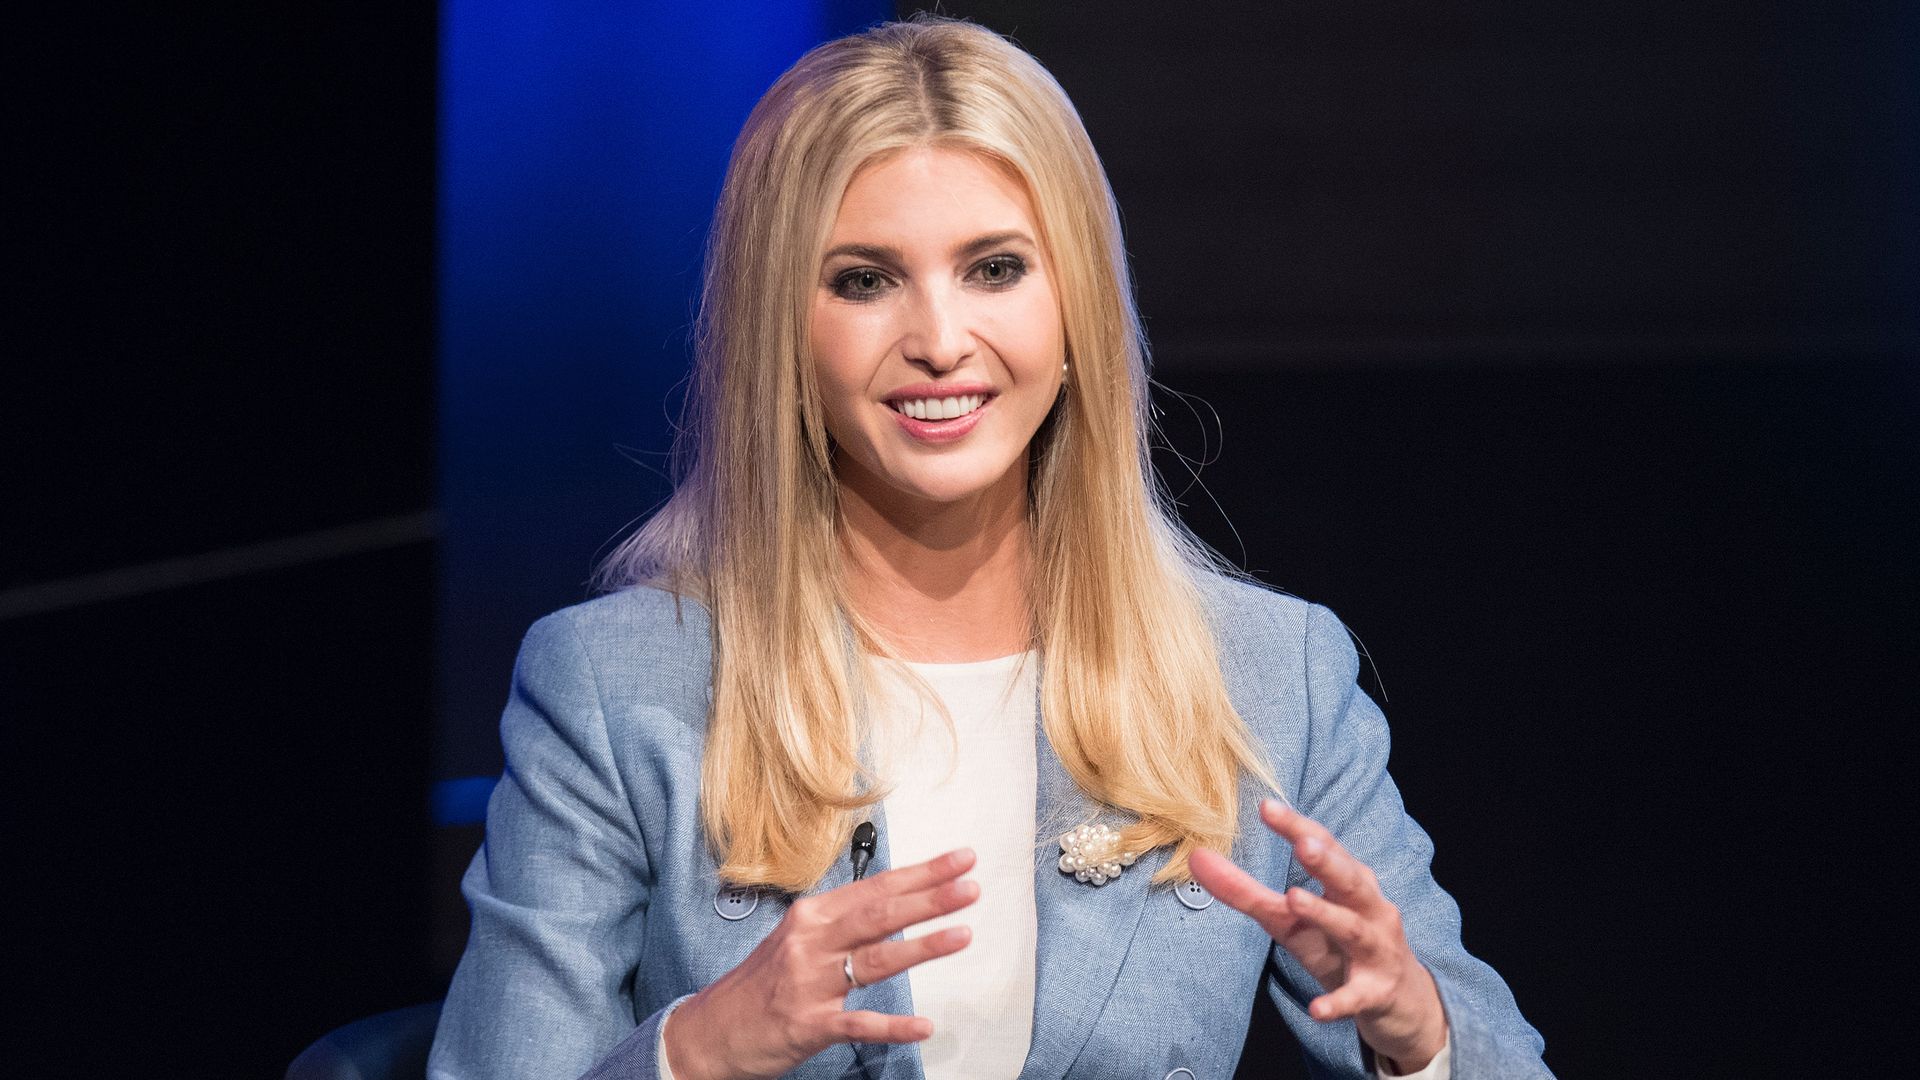 Ivanka Trump speaks enthusiastically with her hands on stage at an Axios event